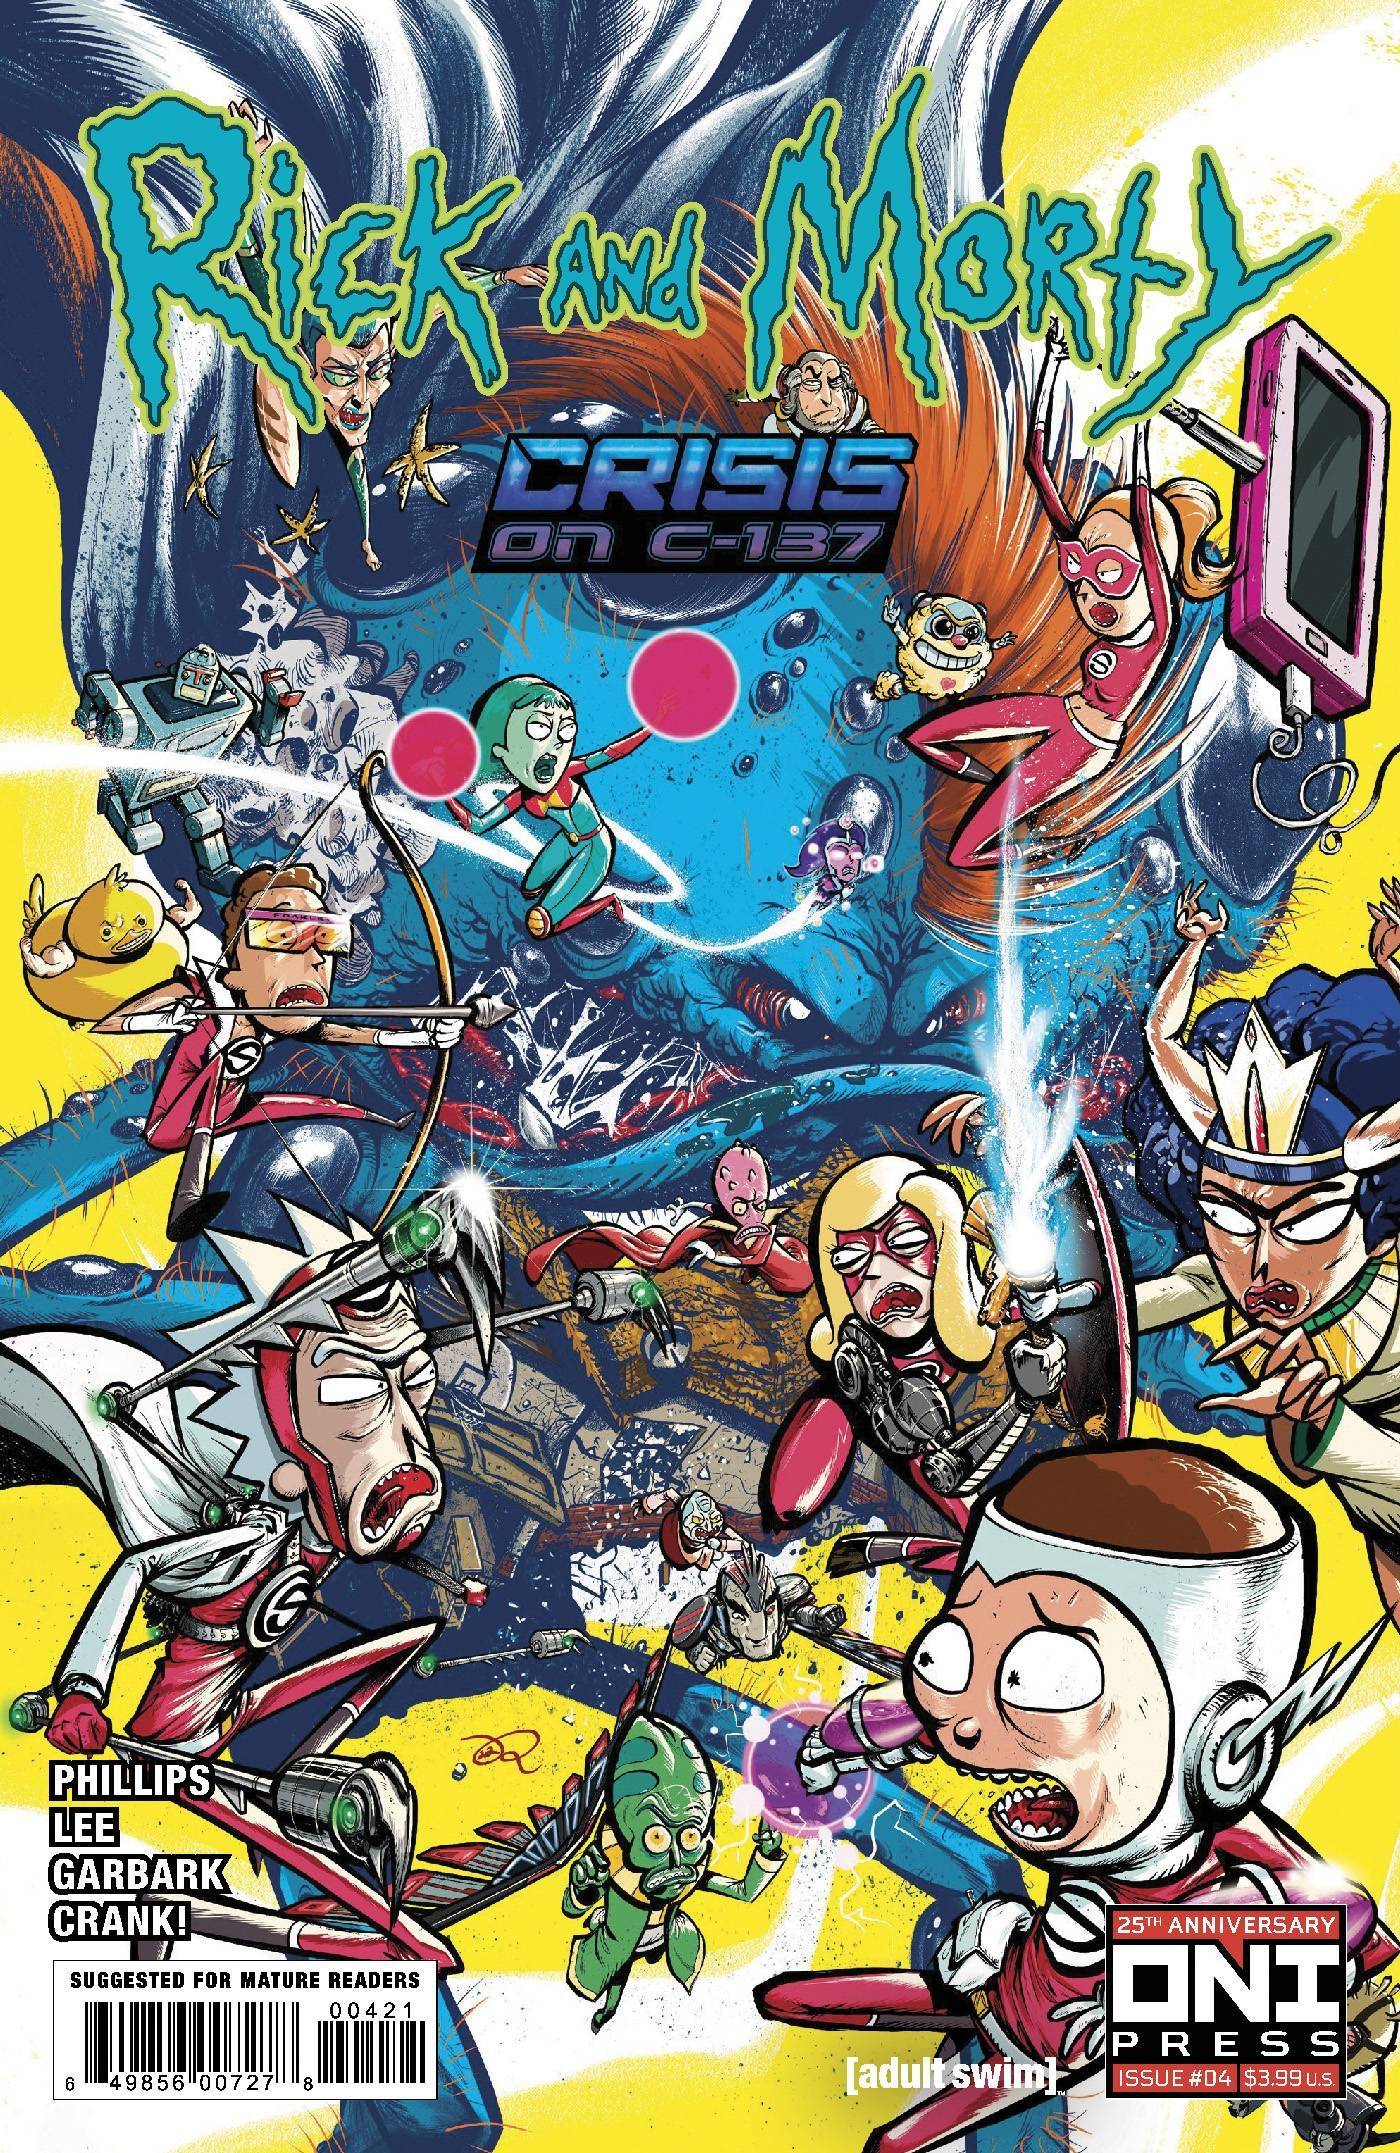 RICK AND MORTY CRISIS ON C 137 #4 CVR A LEE